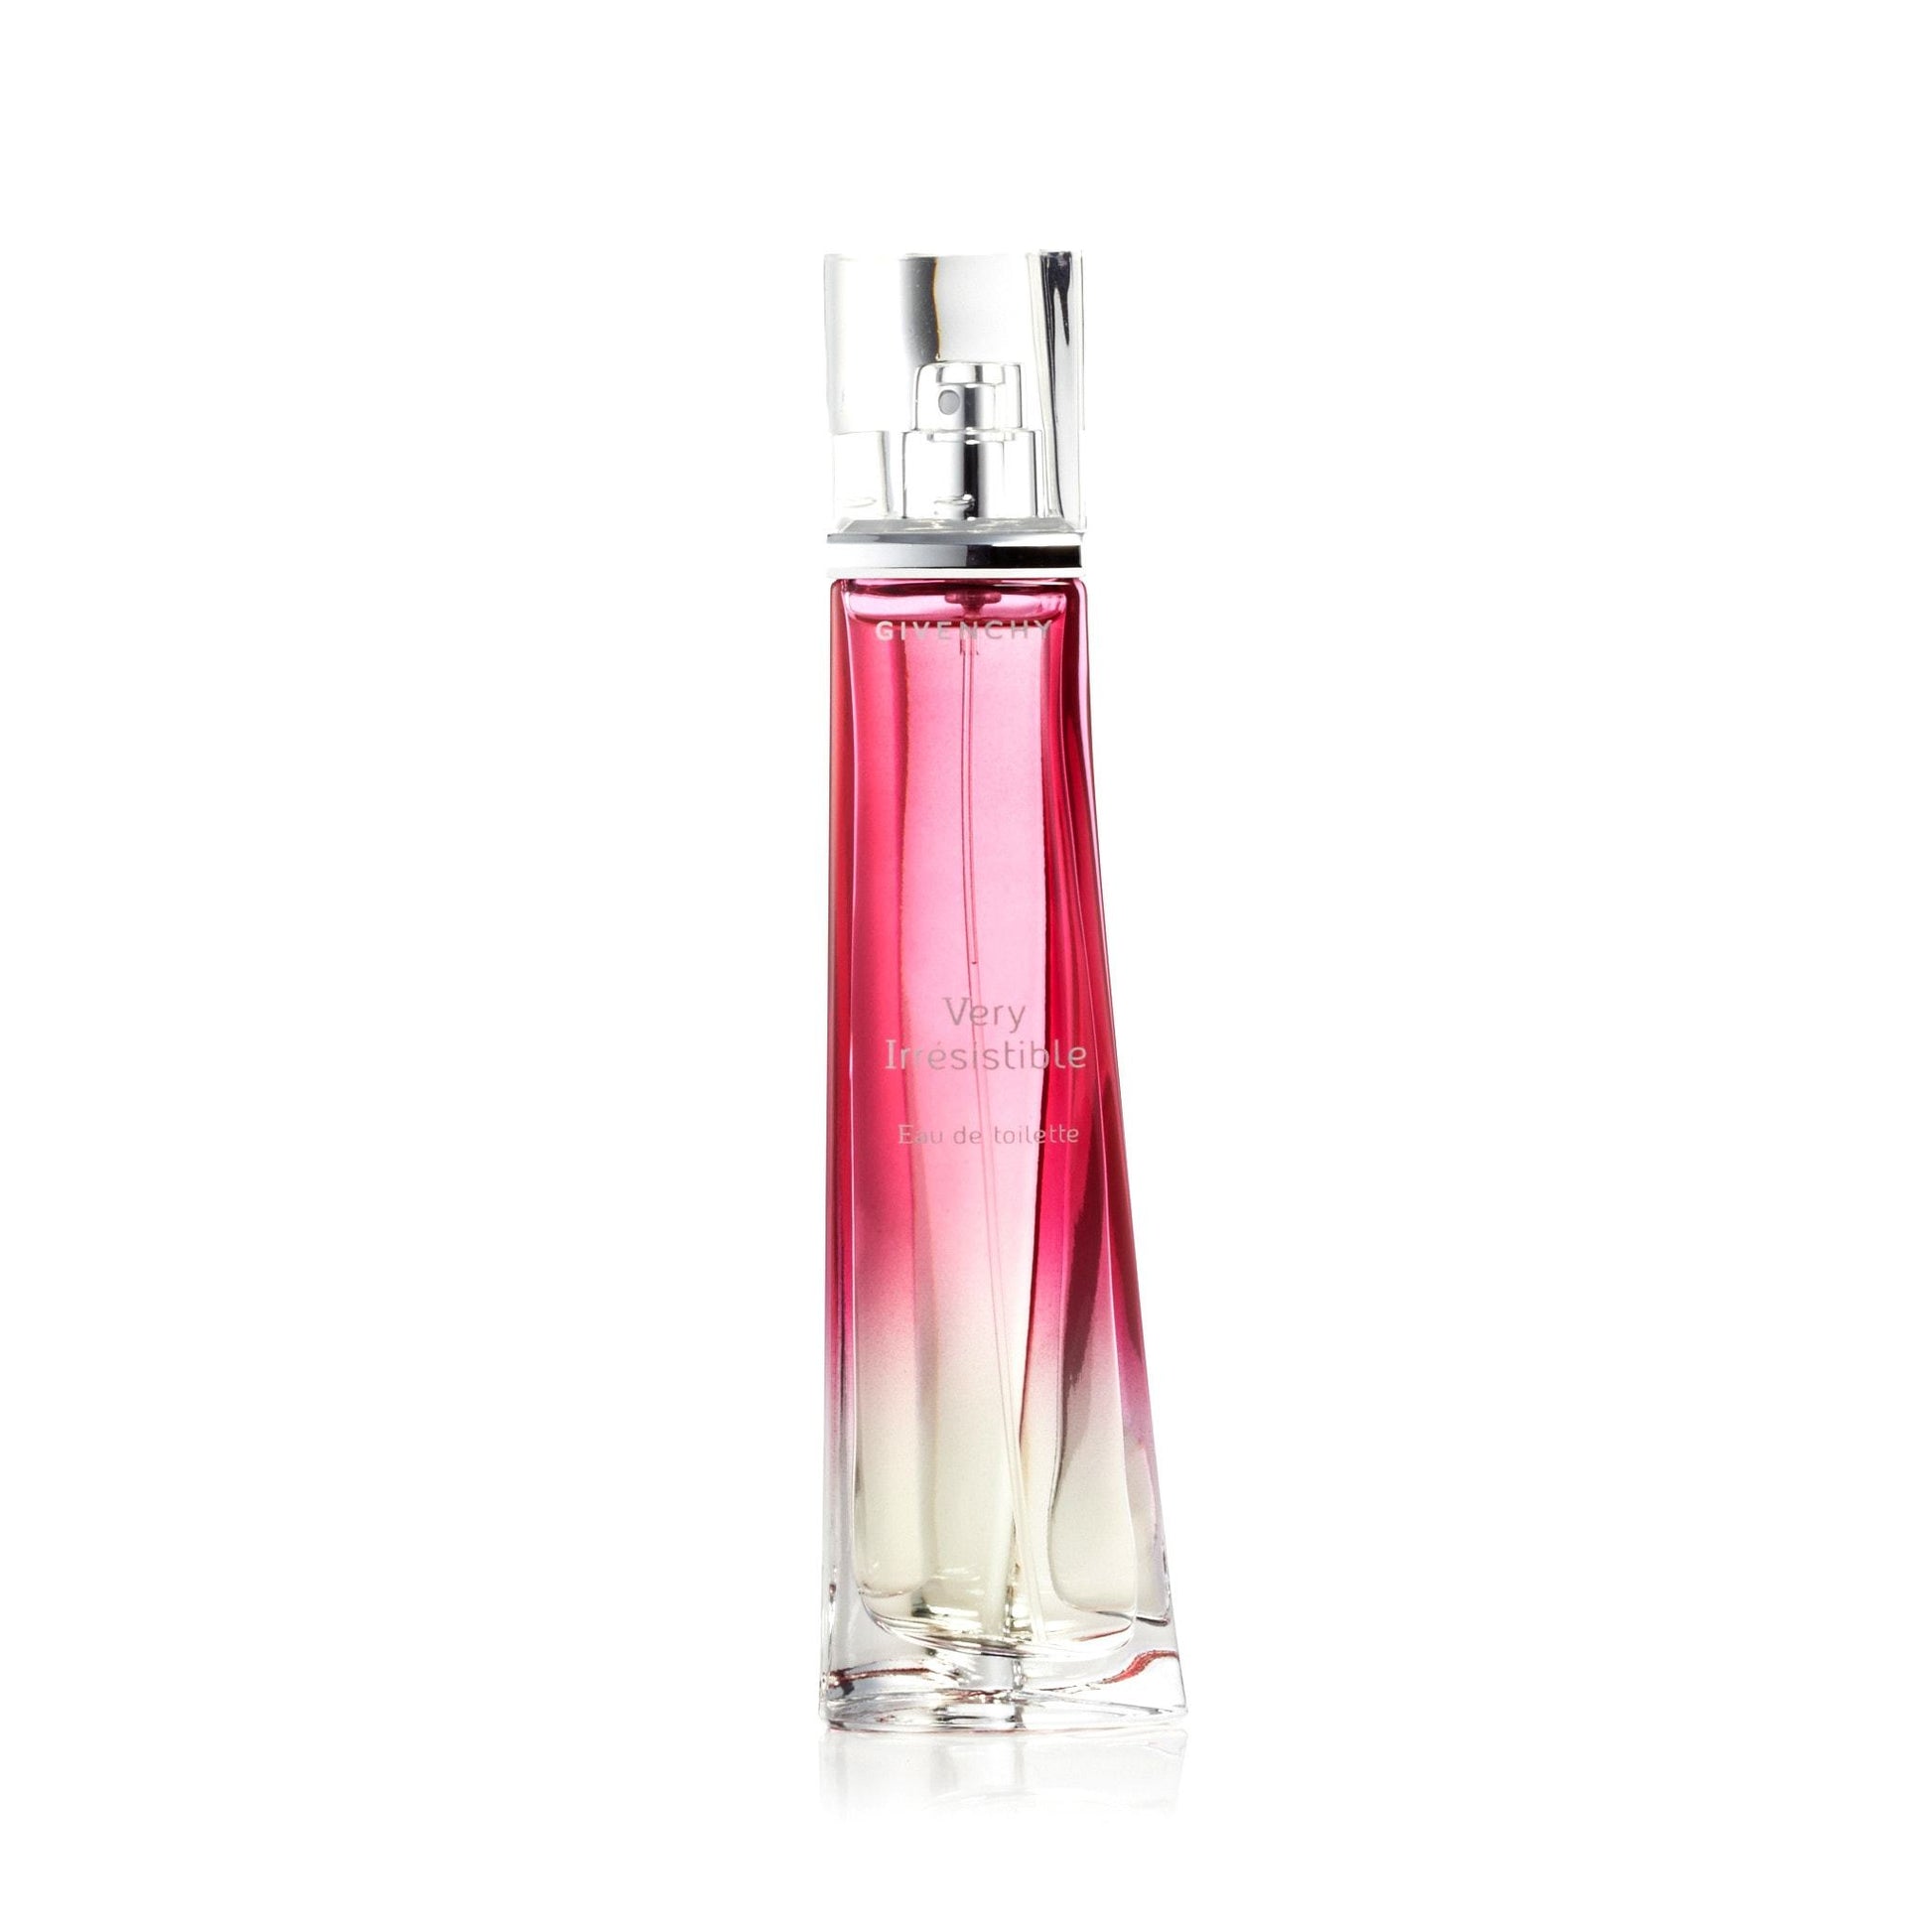 Very Irresistible Eau de Toilette Spray for Women by Givenchy, Product image 1